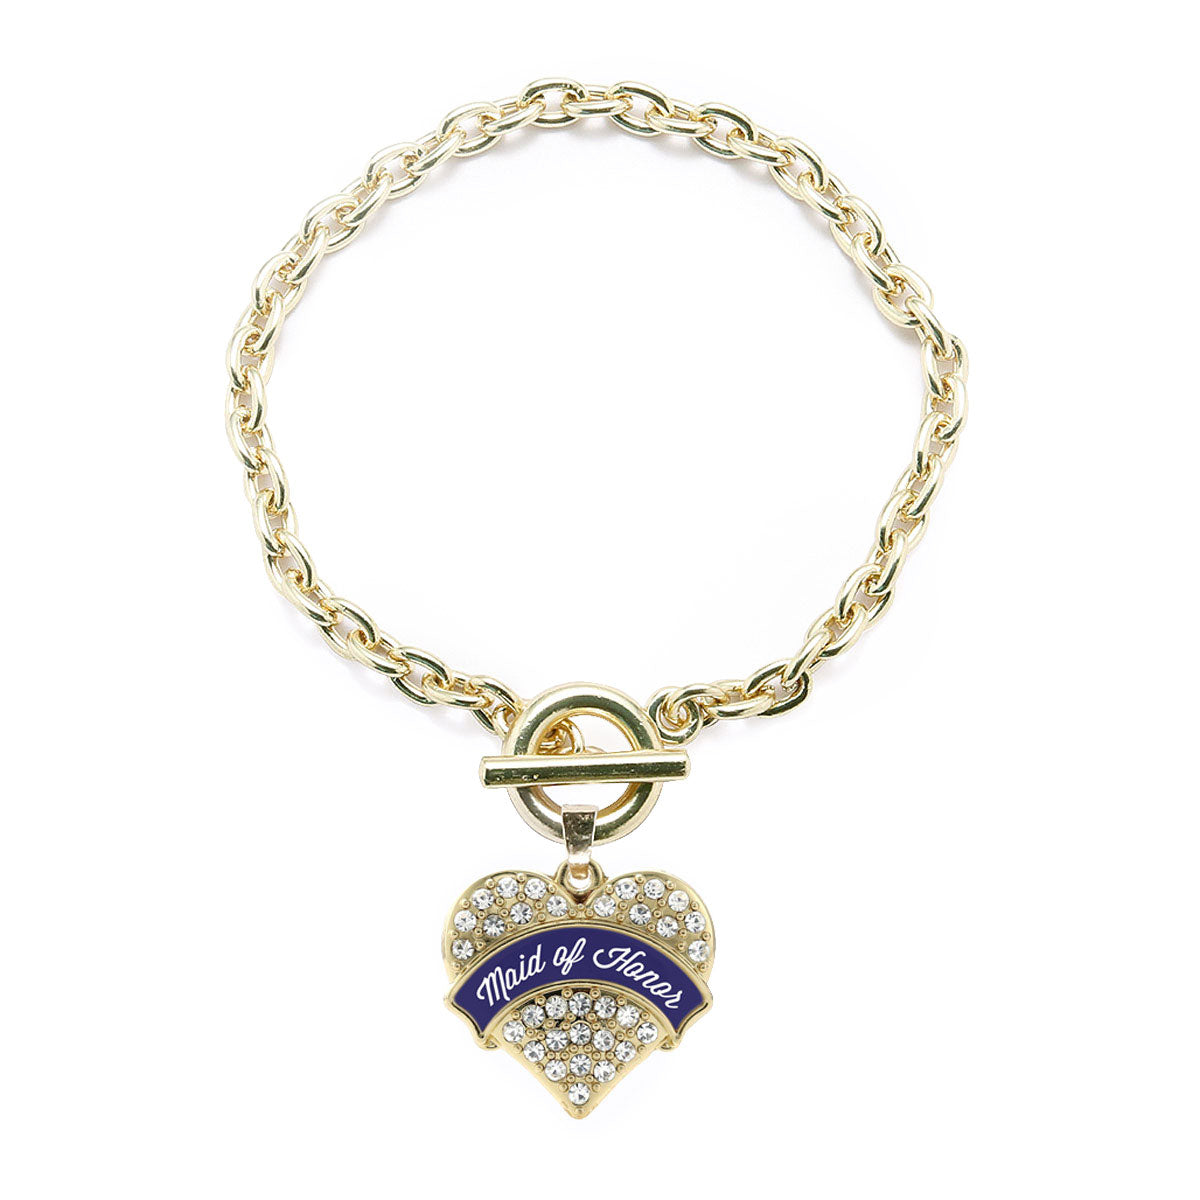 Gold Navy Blue Maid of Honor Pave Heart Charm Toggle Bracelet